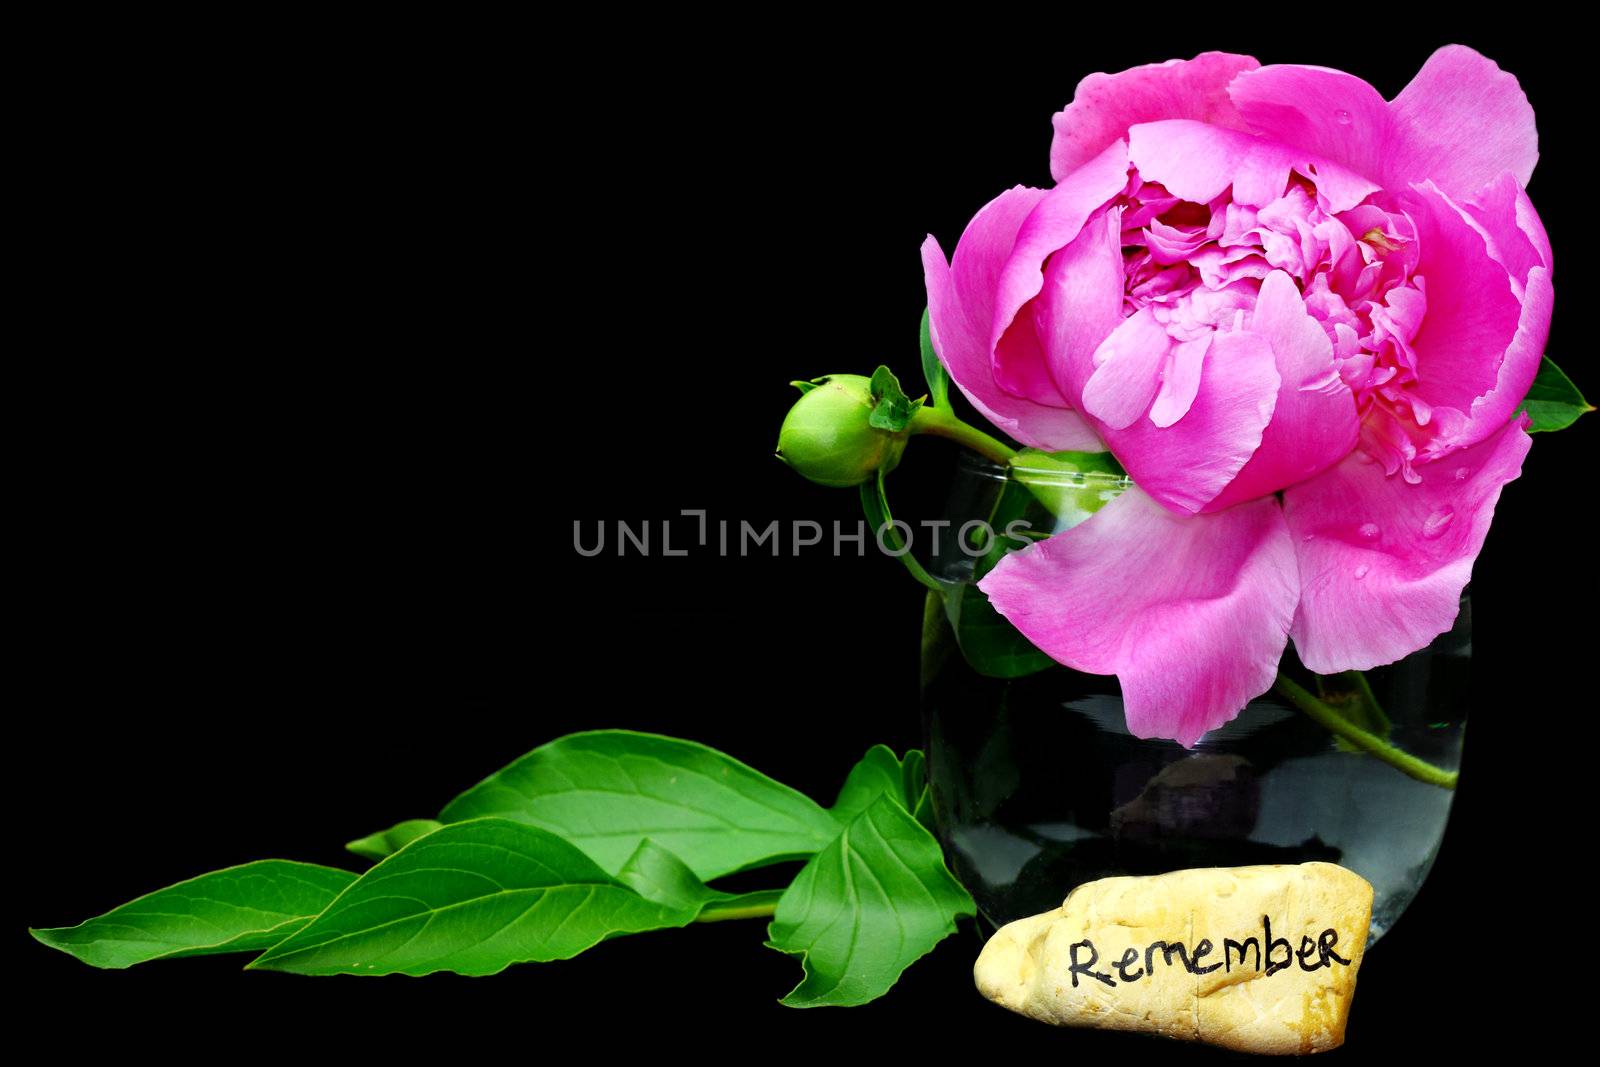 Remembrance stone with beautiful peony flower isolated on black with copyspace.